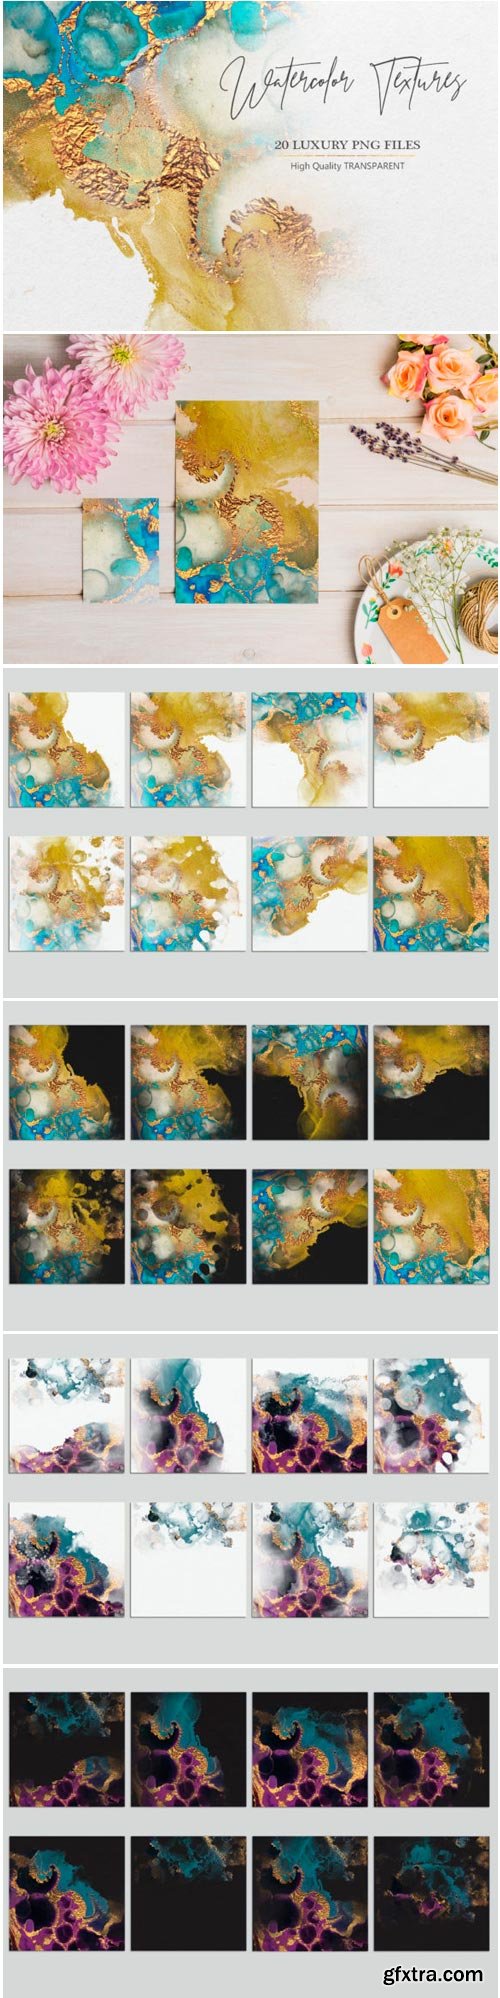 Watercolor PNG Gold Textures 1231446